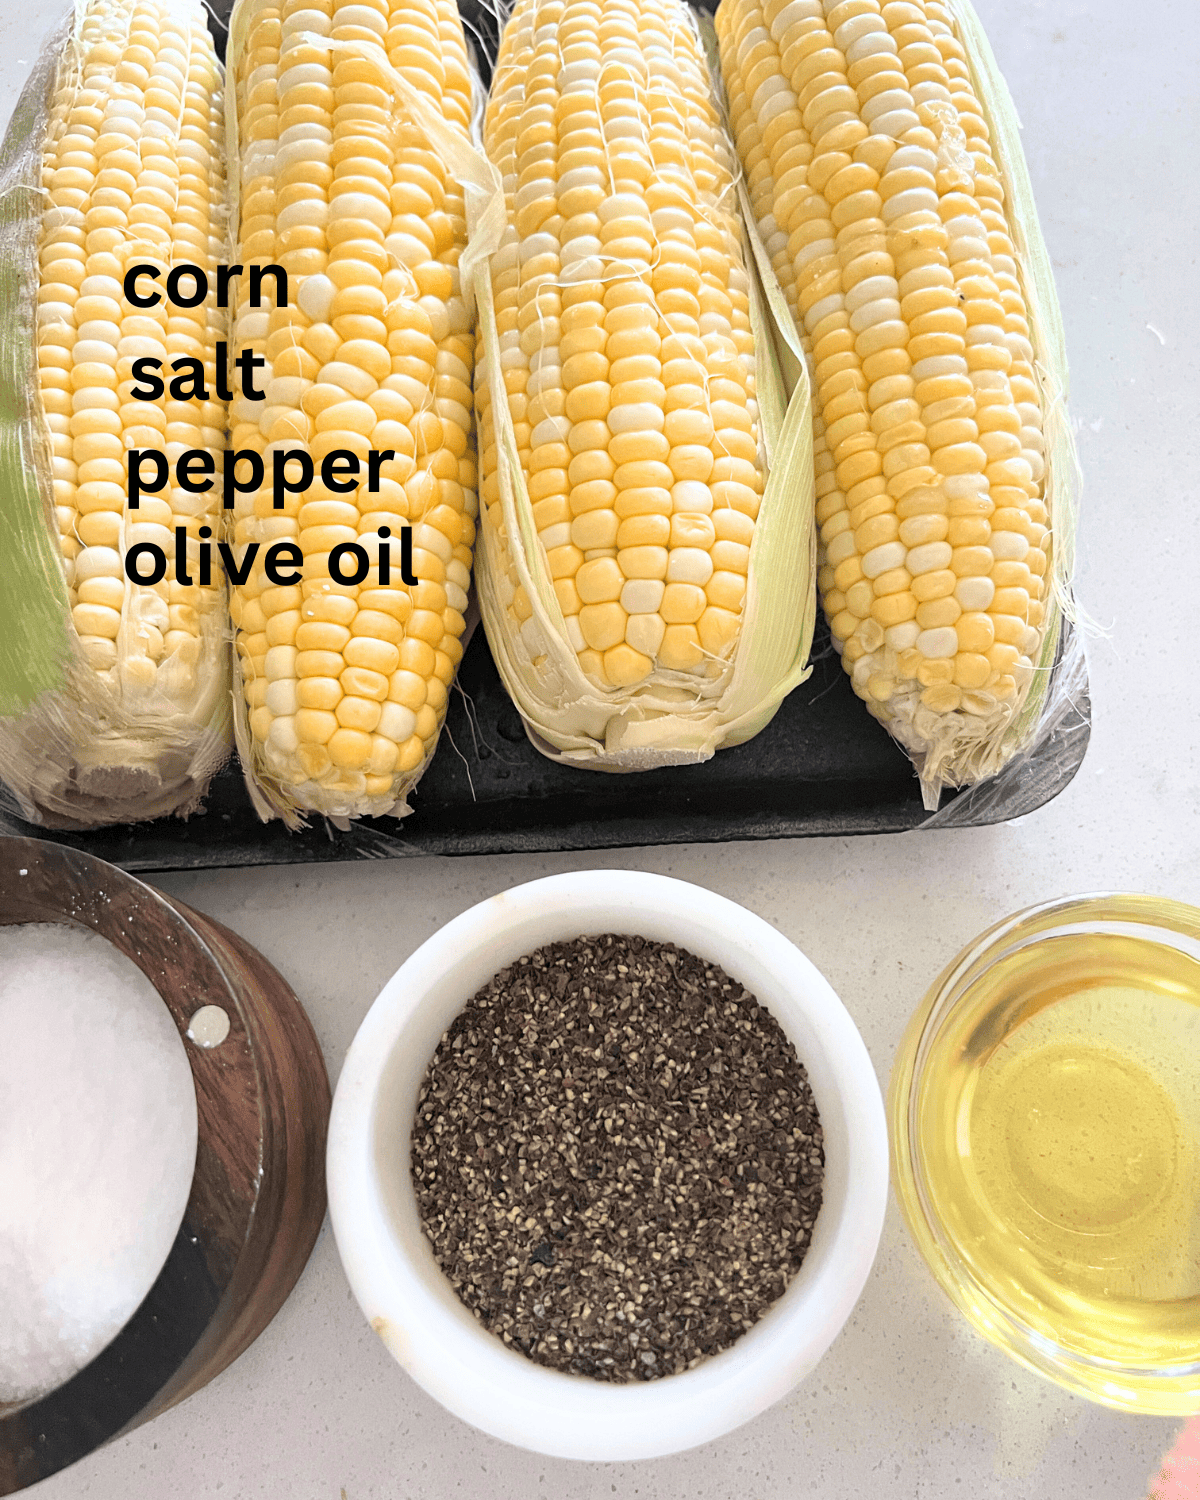 Ingredients for Smoked Corn on the Cob.